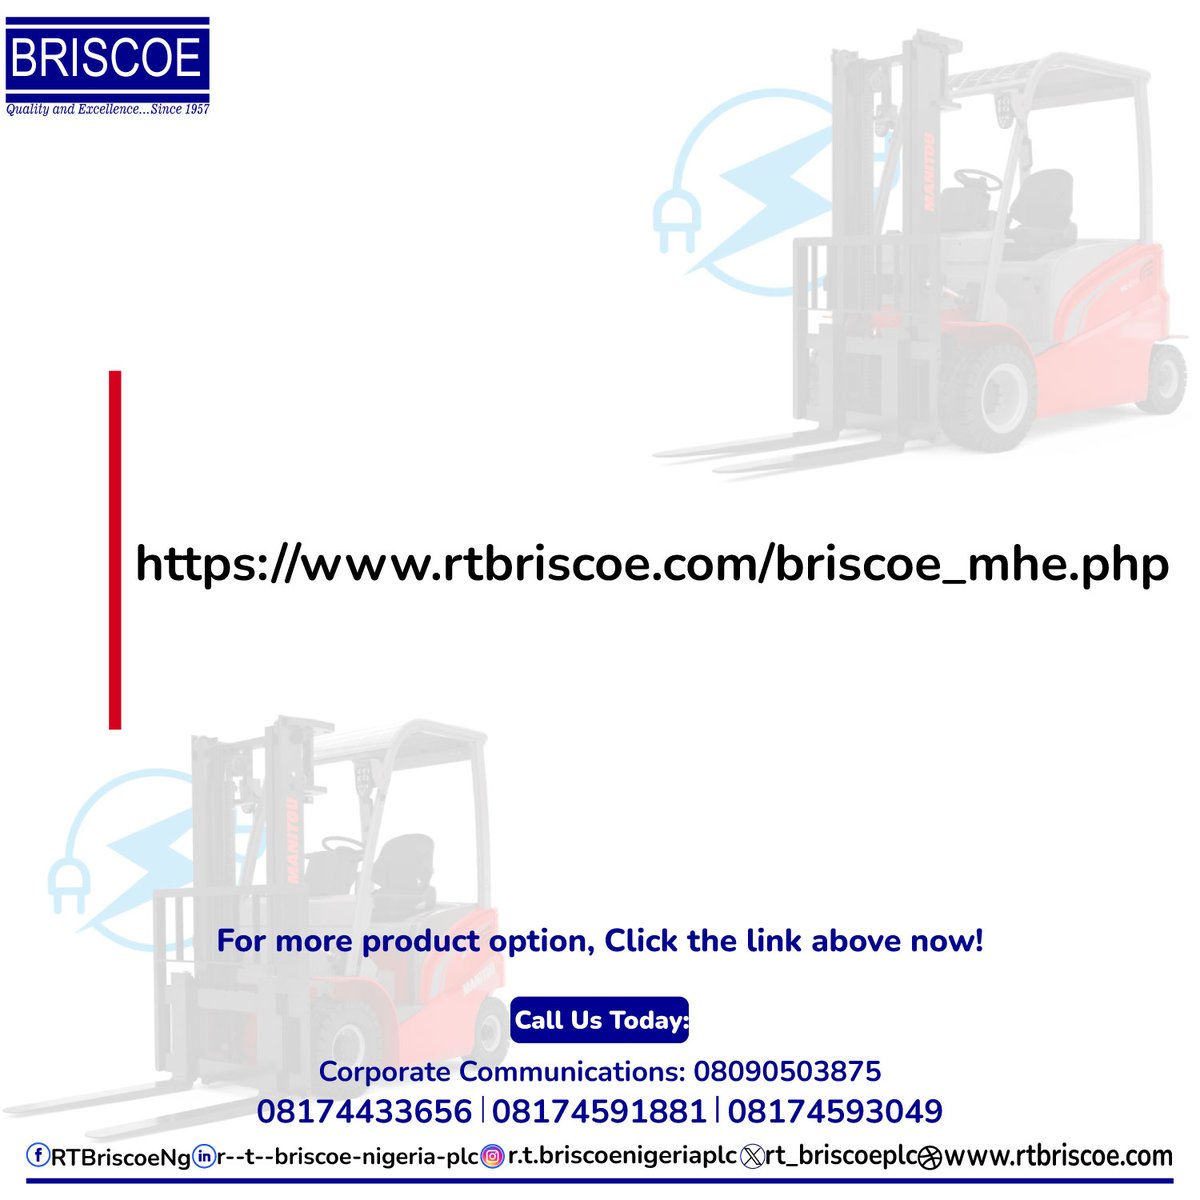 For more product options, click the link below rtbriscoe.com/briscoe_mhe.php

#tuesdaycrush #tuesdayproduct #manitou #machines #rtbriscoenigeriaplc #electricforklift #click #callustoday